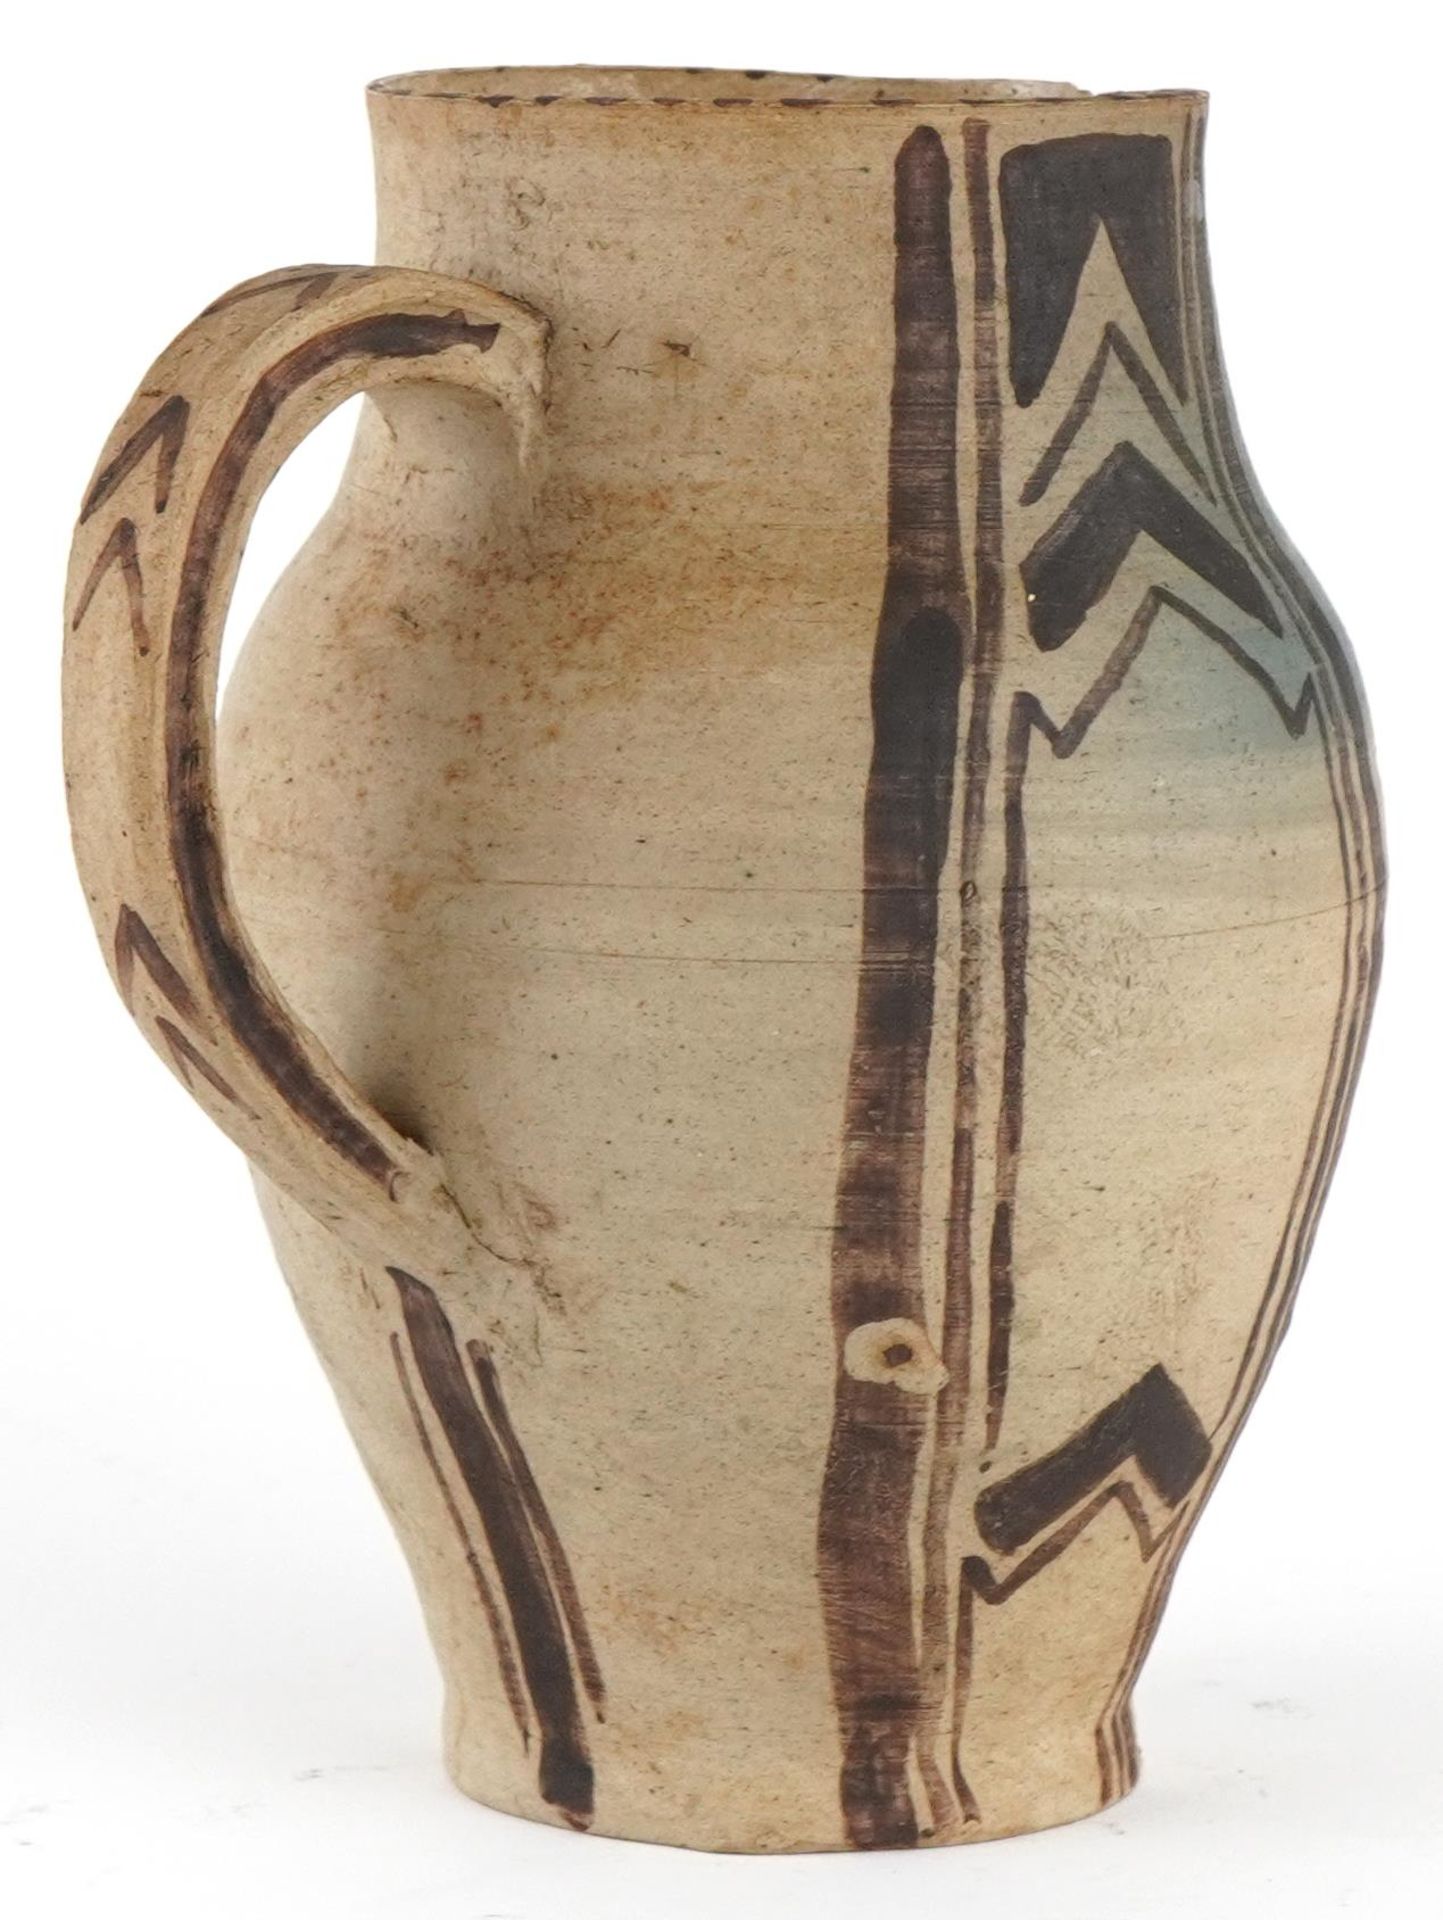 Early Carter's Poole studio pottery jug hand painted with geometric design, 15.5cm high : For - Image 2 of 4